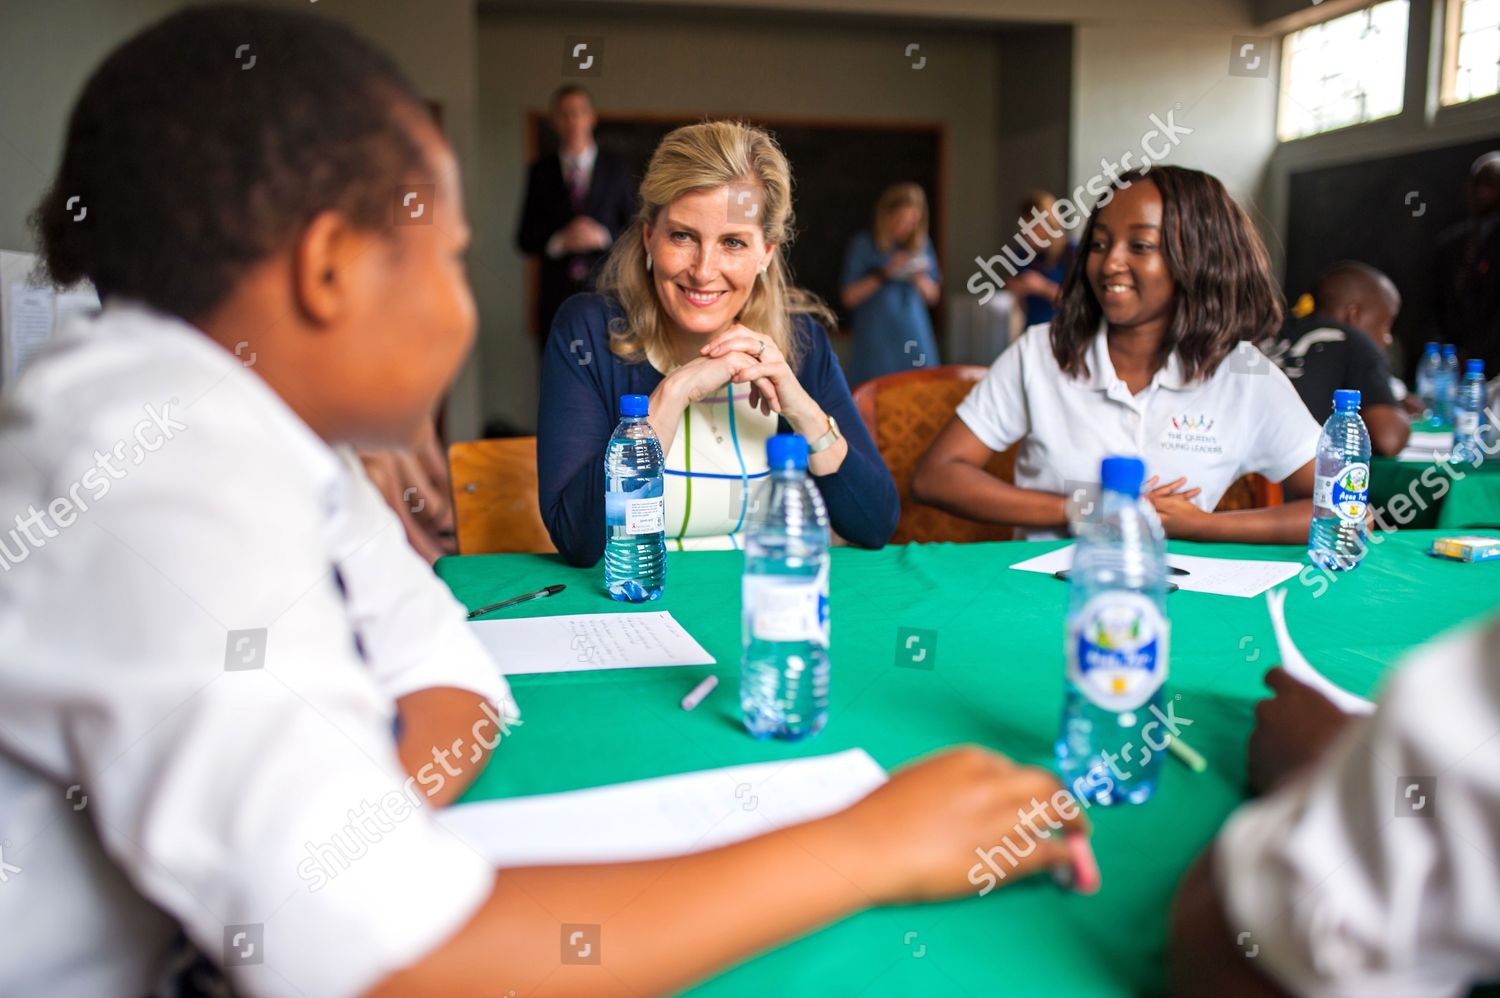 sophie-countess-of-wessex-visit-to-malawi-shutterstock-editorial-8521345c.jpg